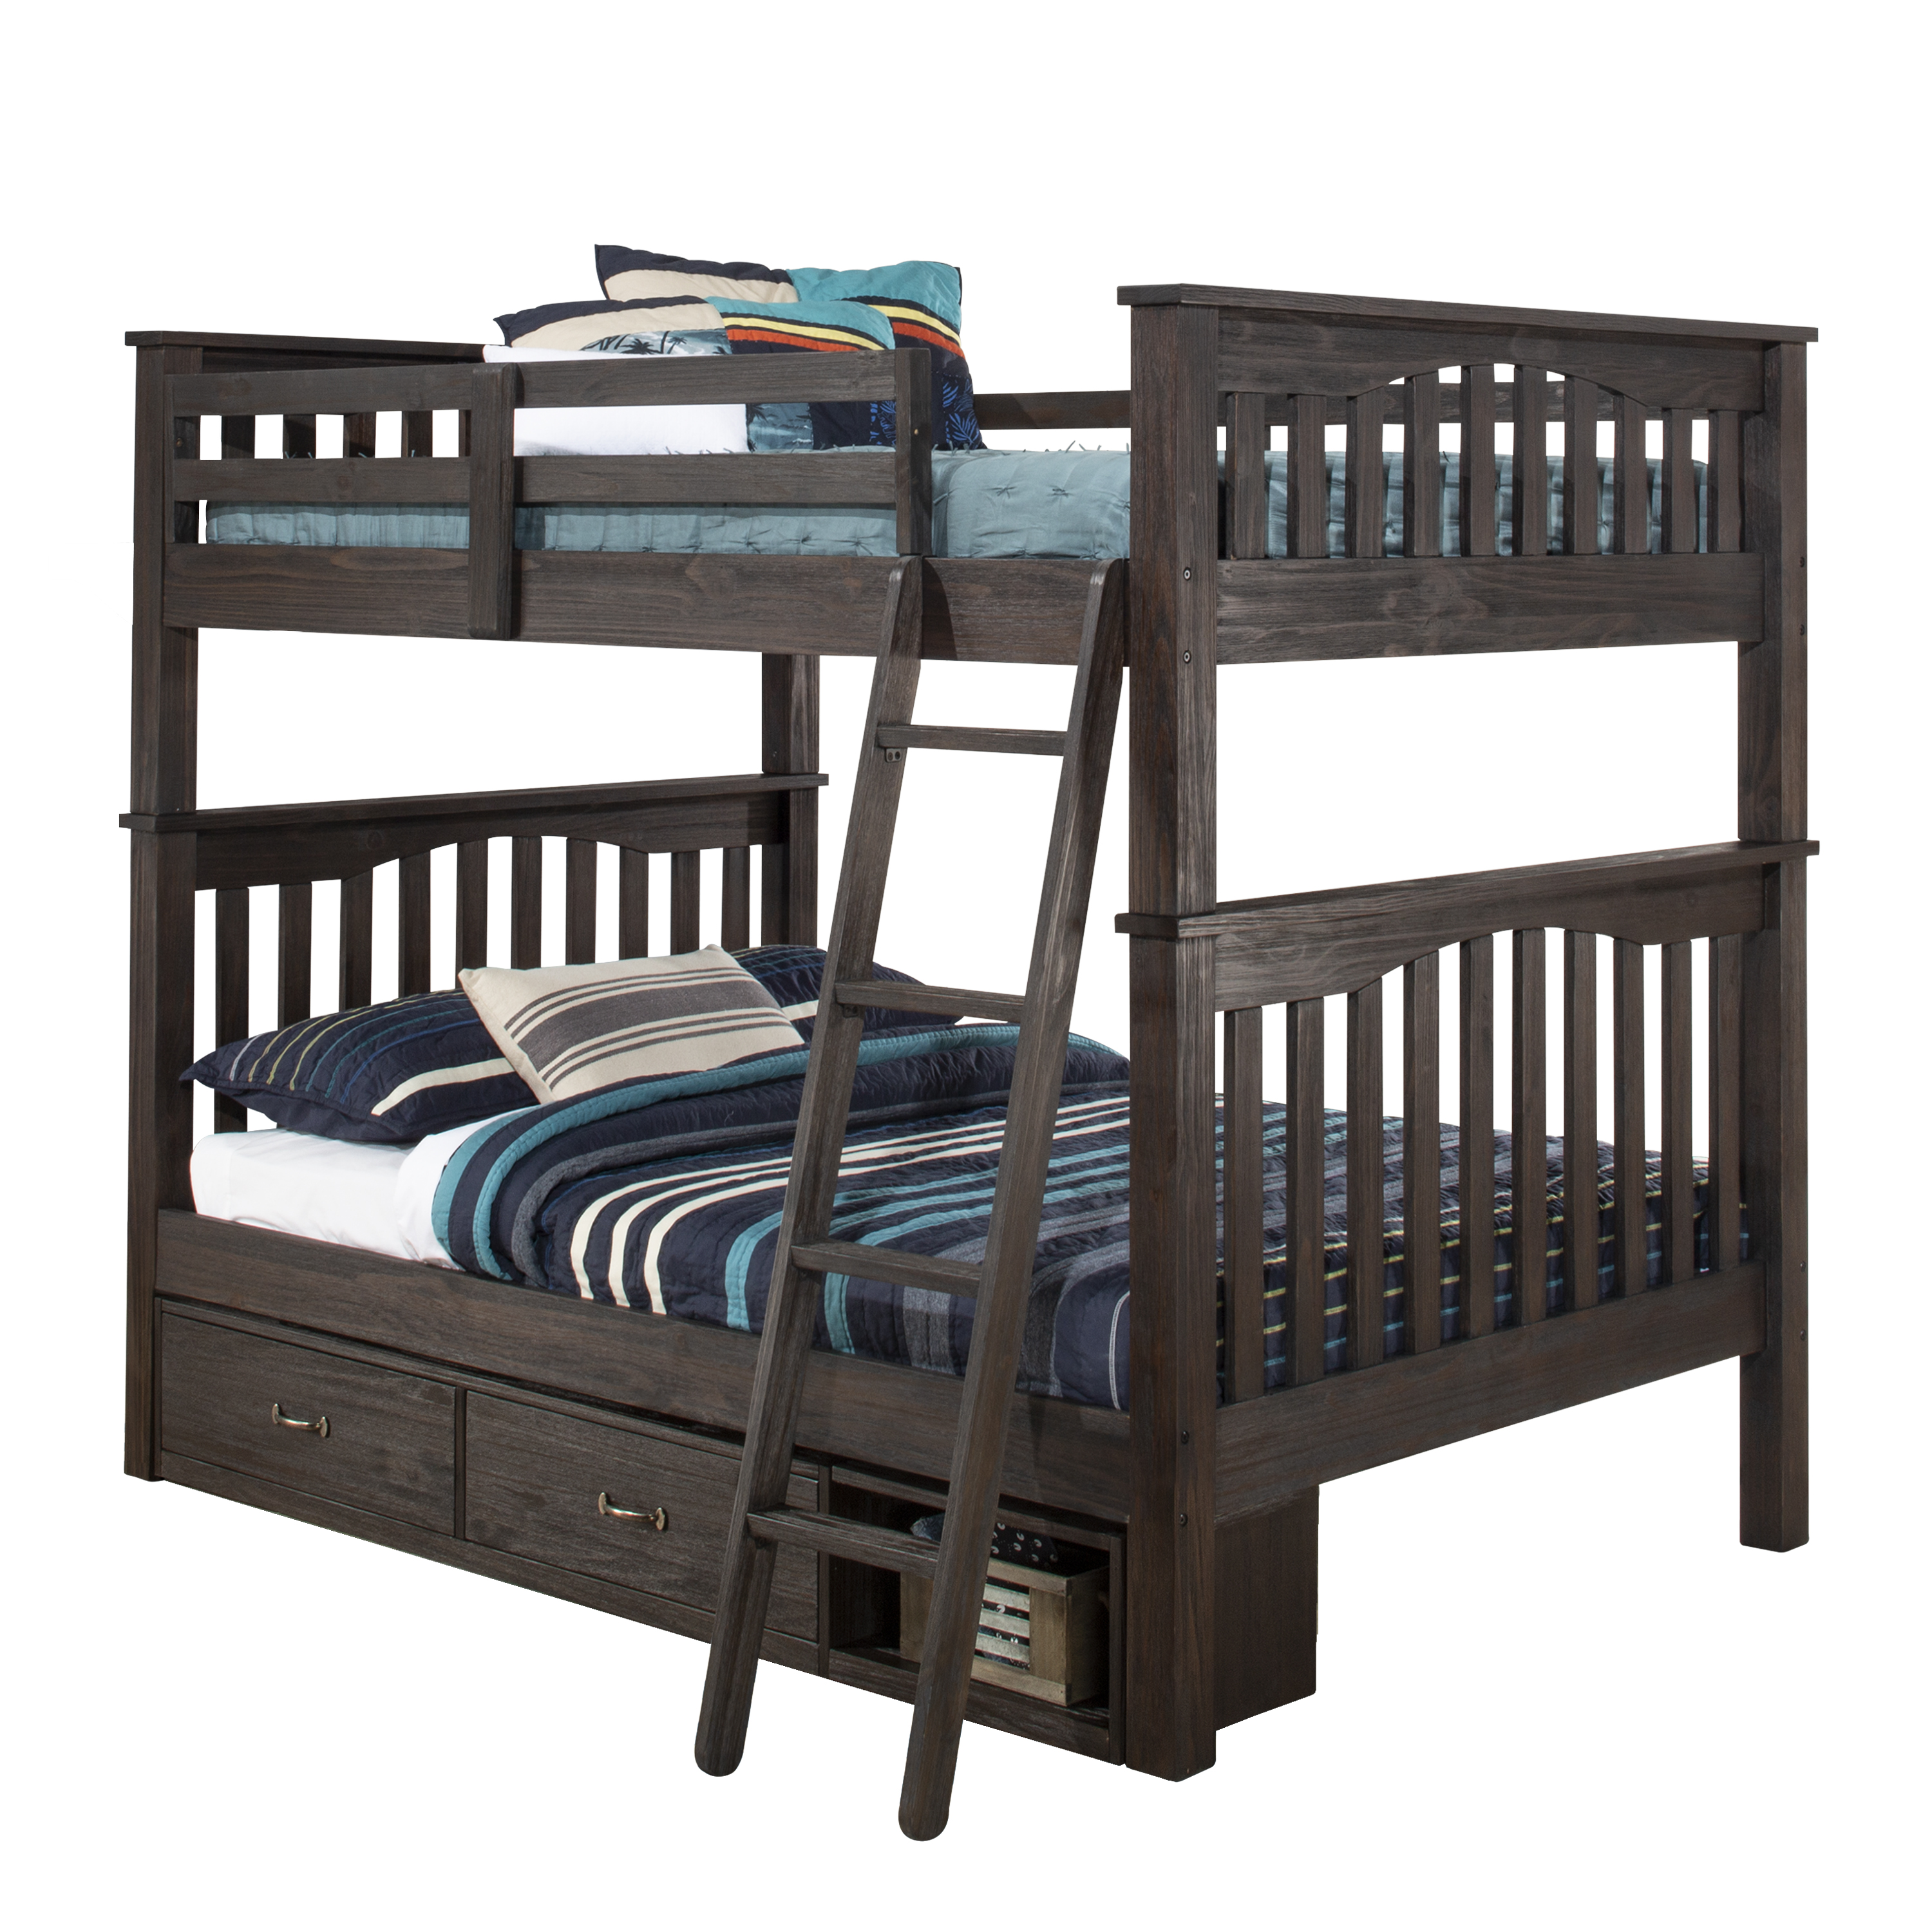 Highlands Wood Bunk Bed with Storage